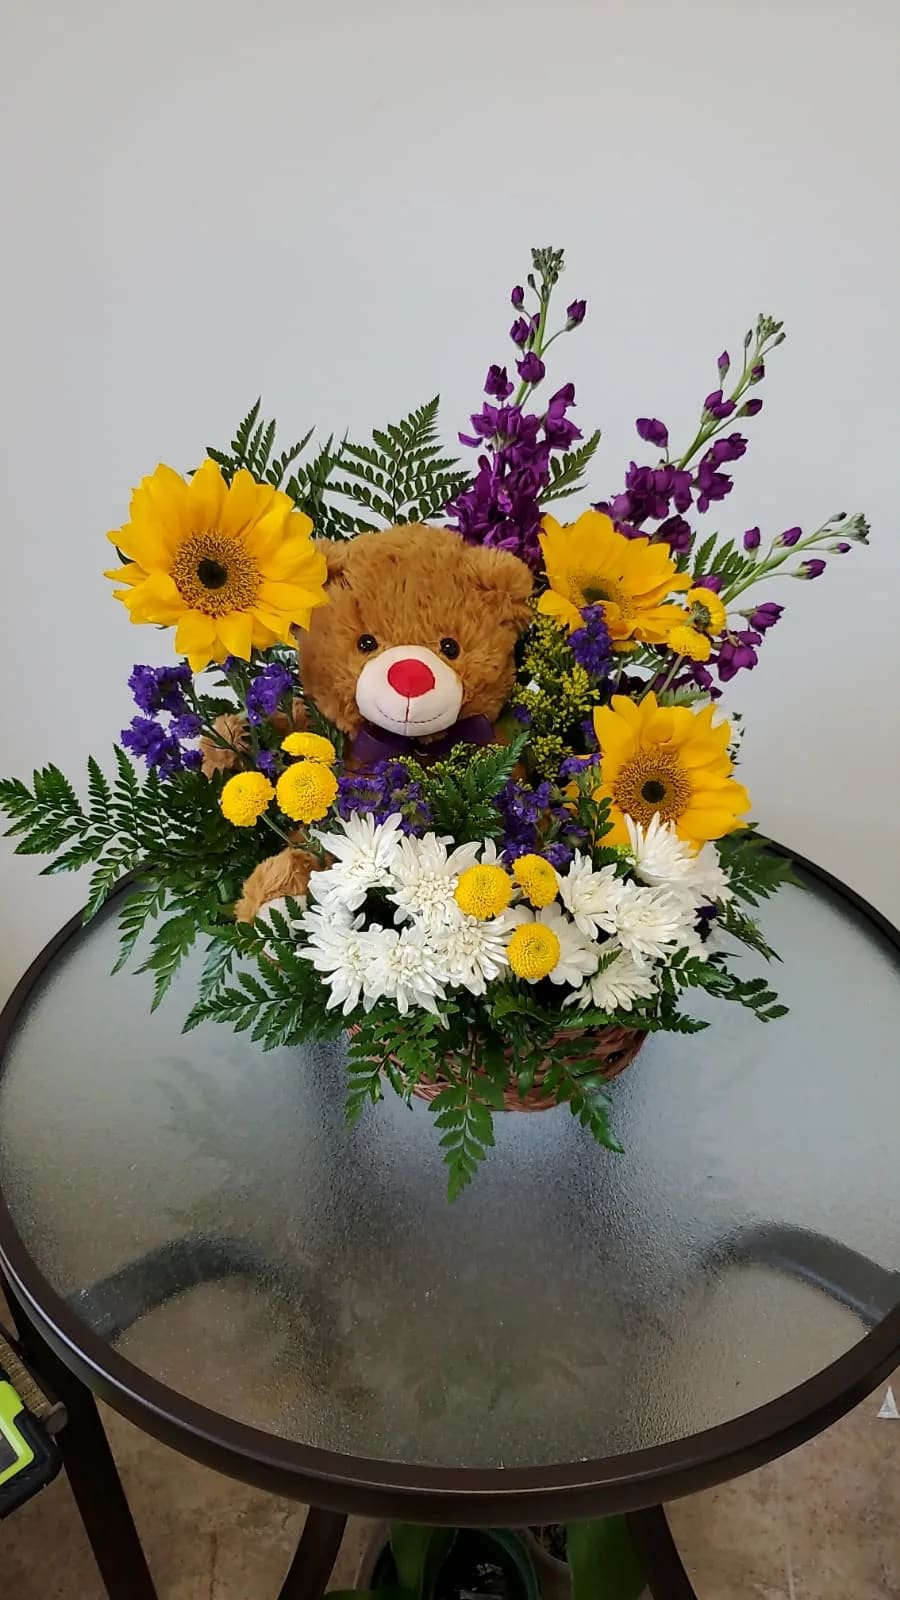 Arrangement with sunflowers and a plush bear inside